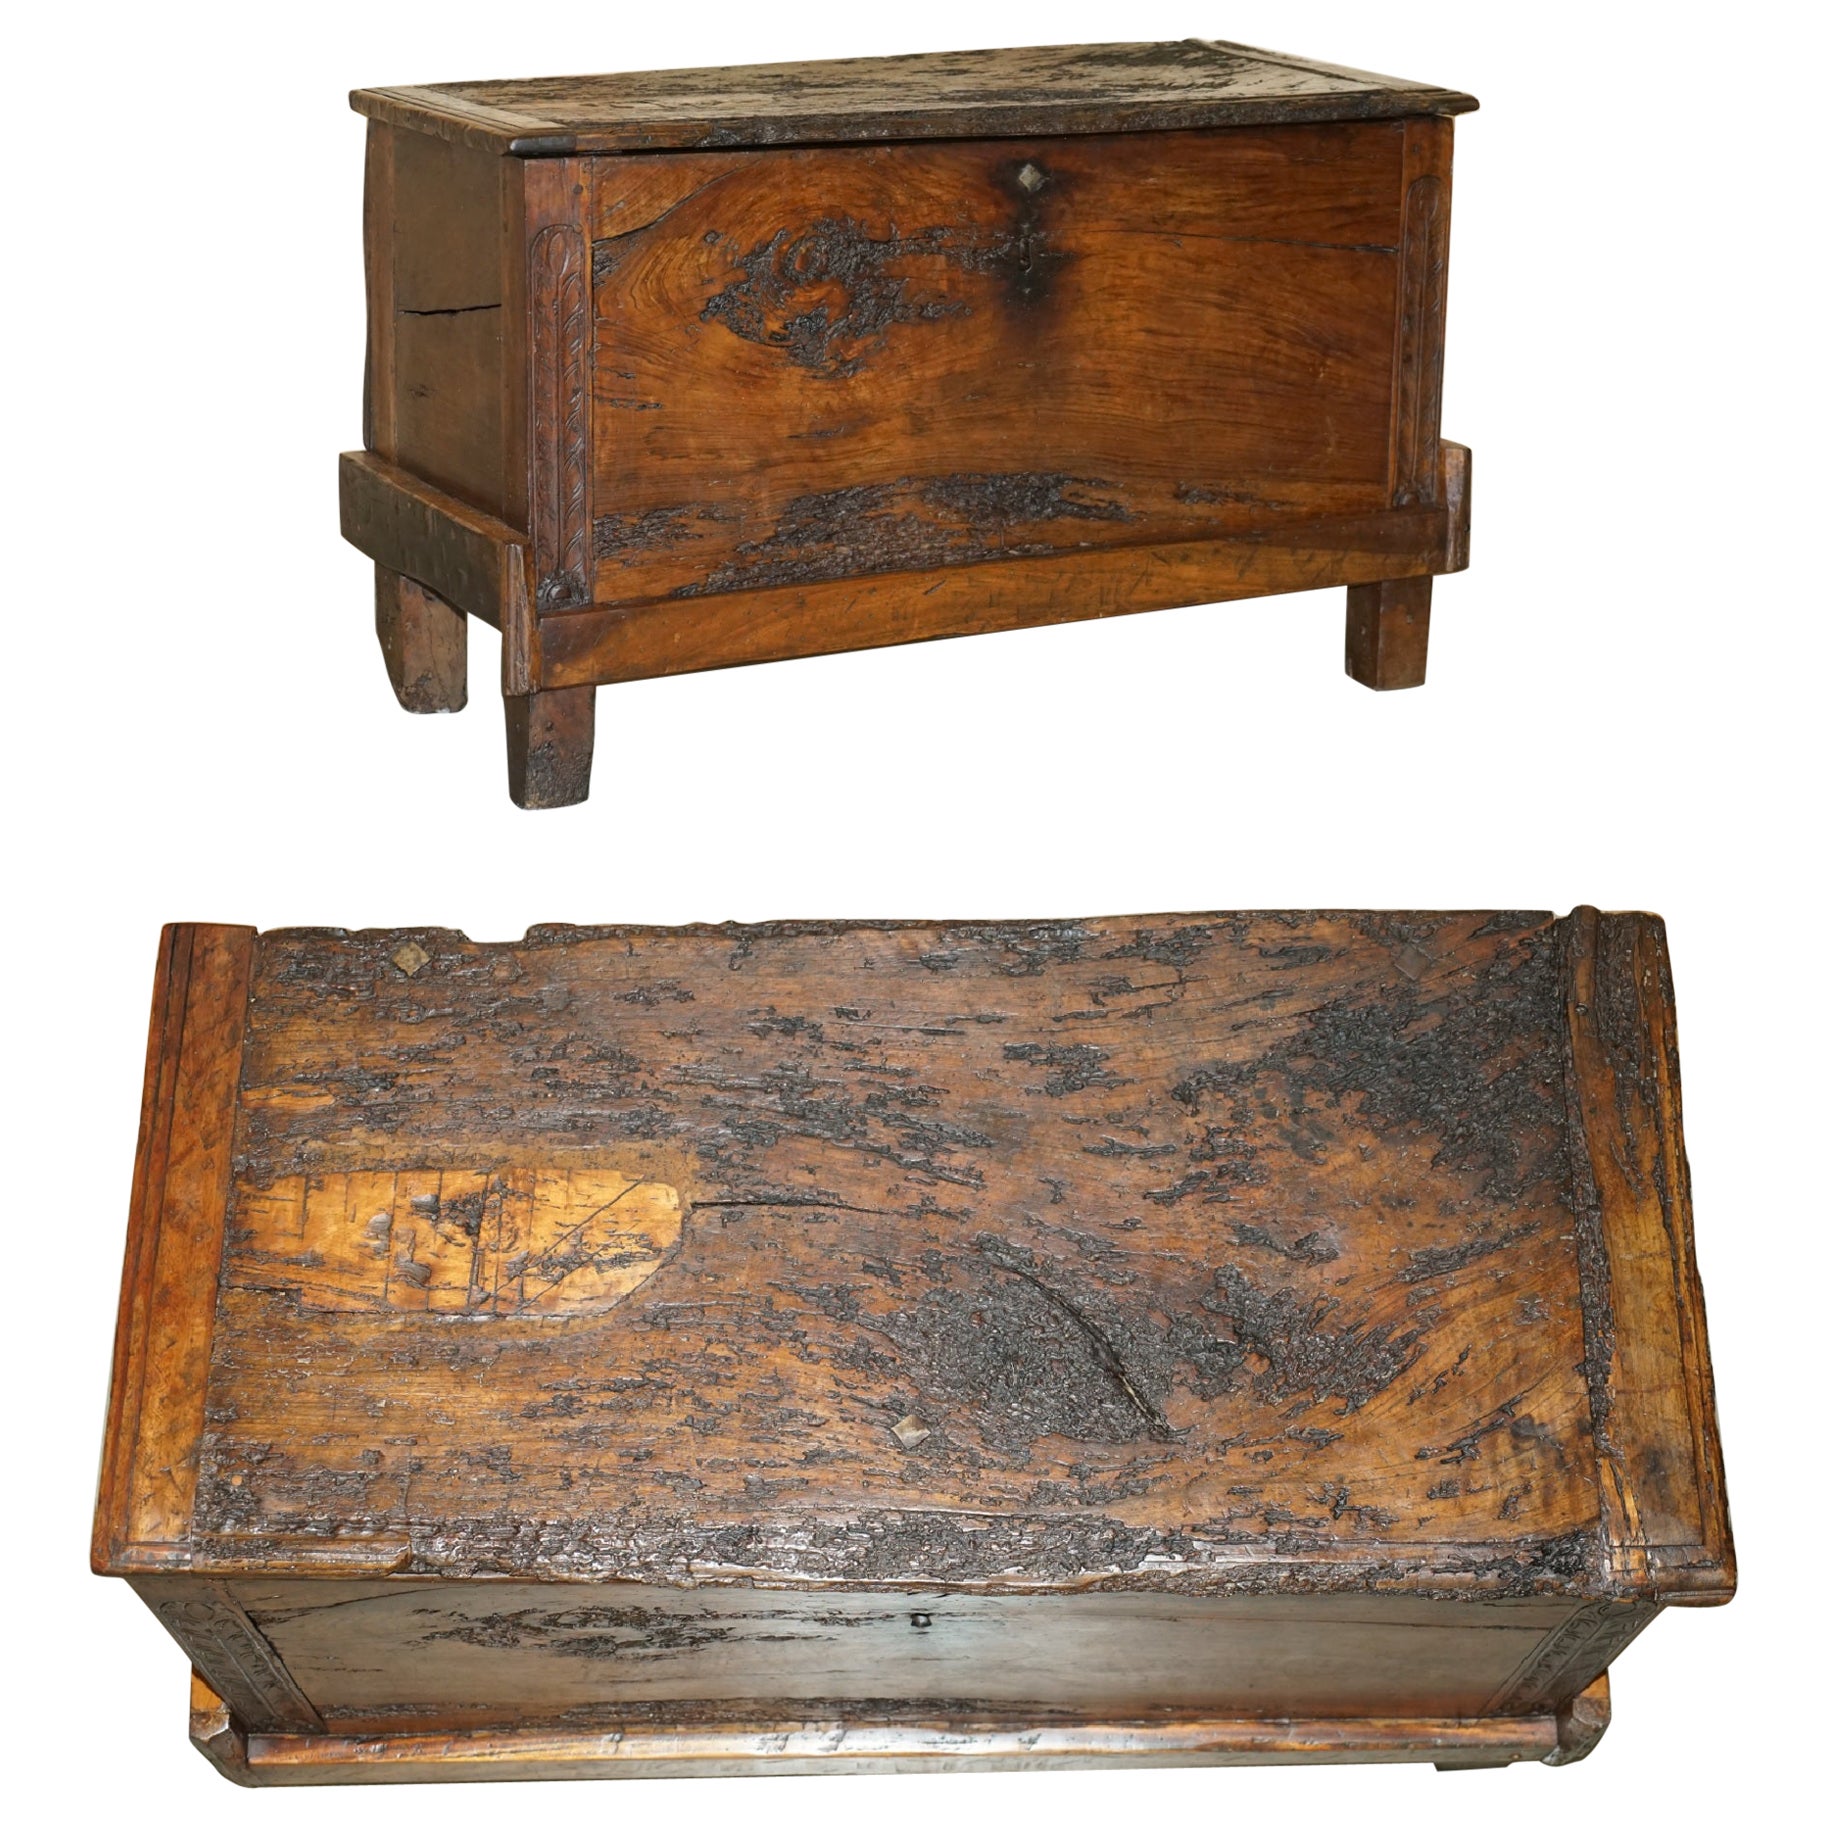 ANTiQUE 18TH CENTURY SIX PLANK HEAVILY BURRED CHESTNUT WOOD TRUNK CHEST For Sale